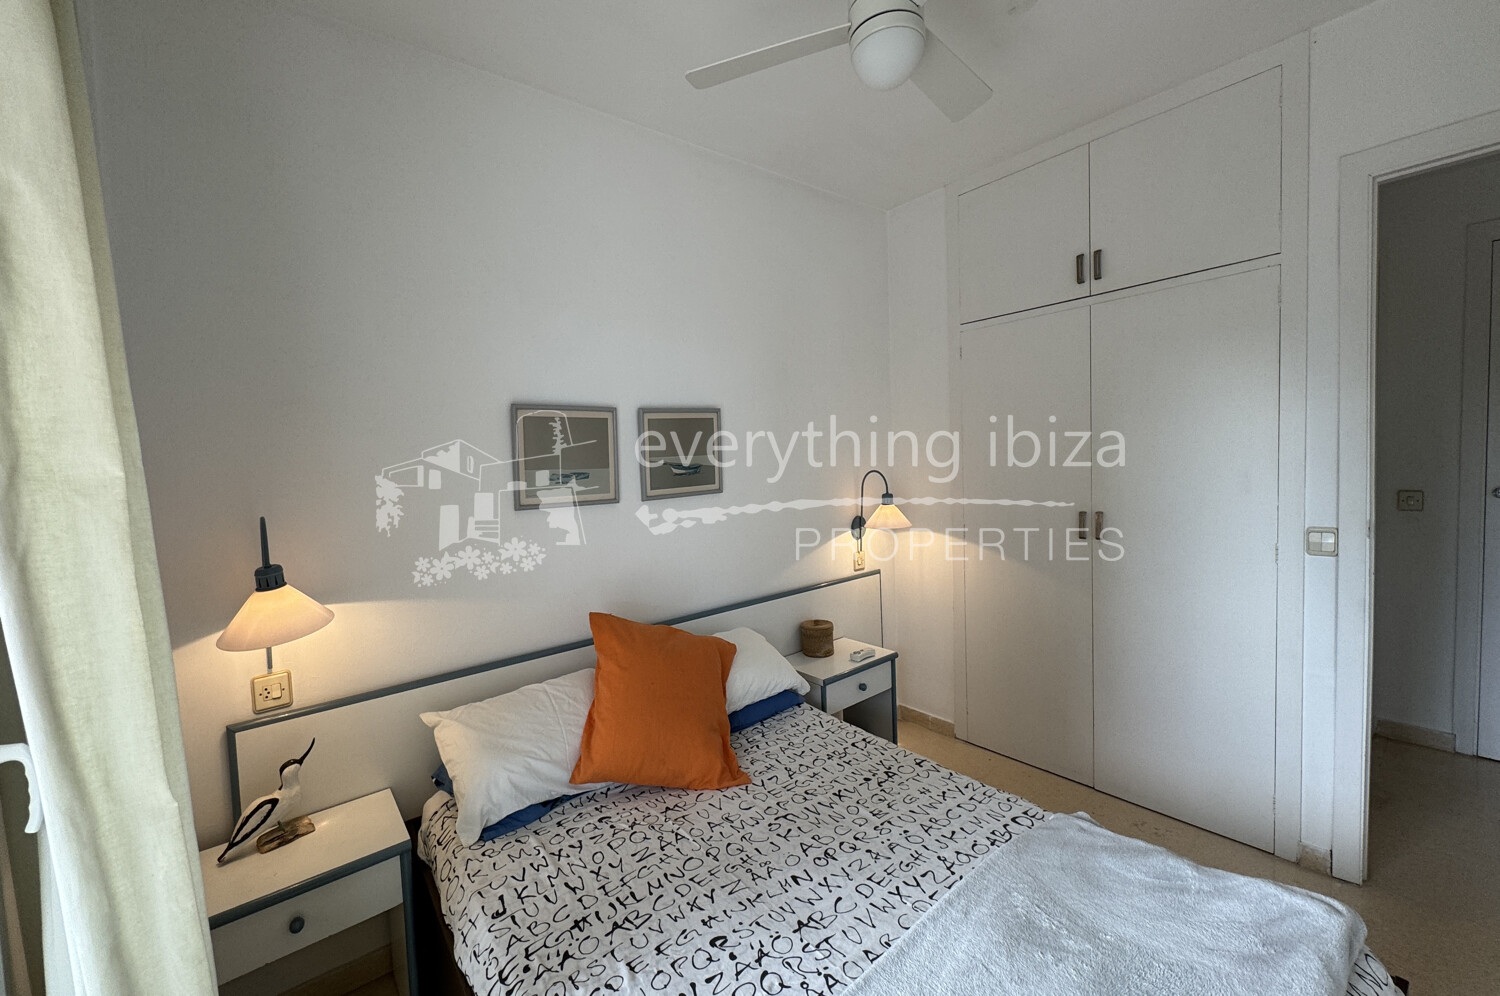 Charming One Bed Apartment Close to the Beach and Bay, ref. 1635, for sale in Ibiza by everything ibiza Properties